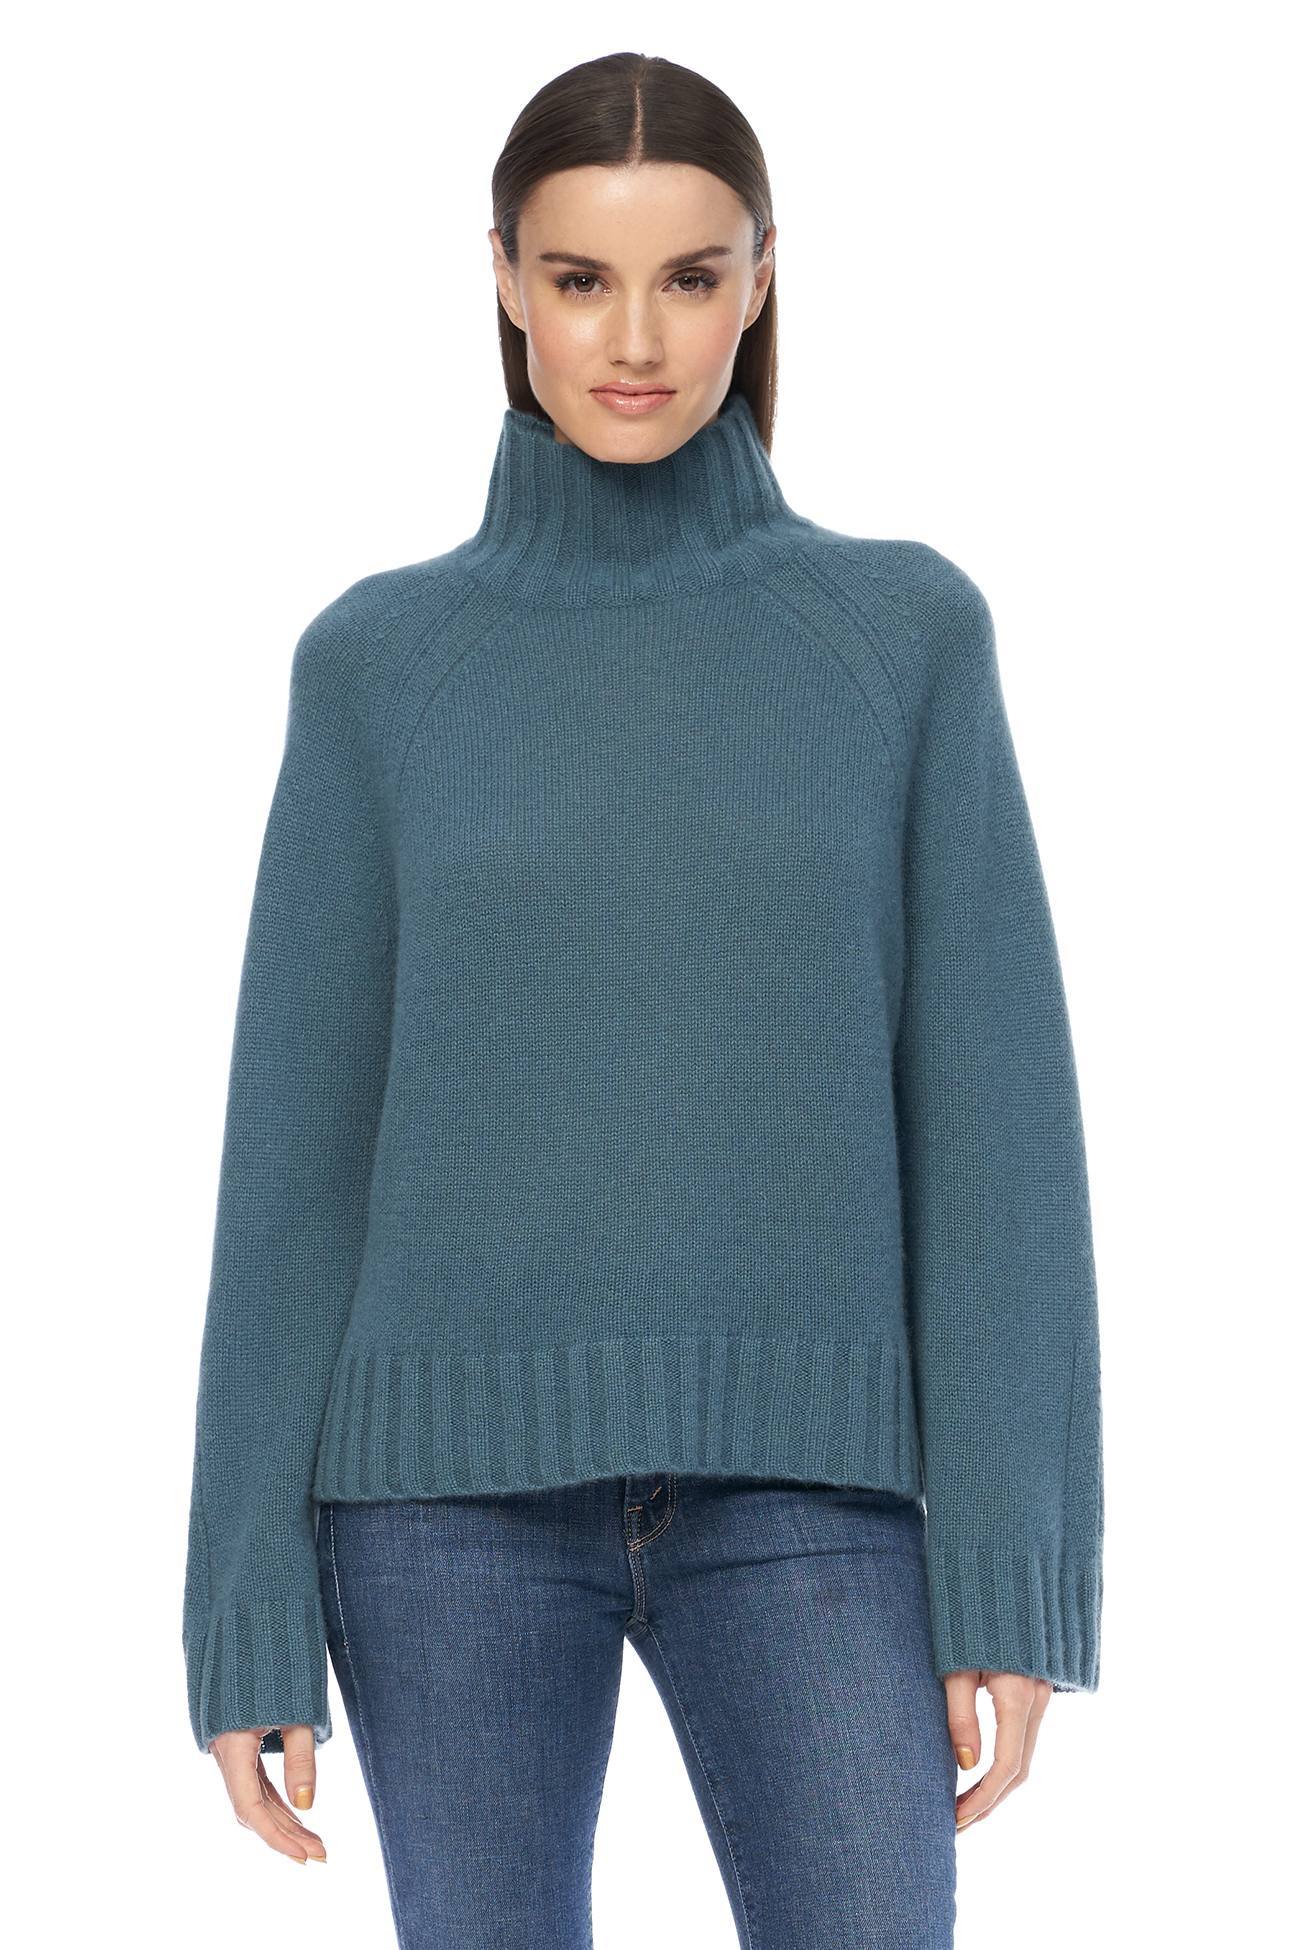 360 Cashmere Leighton Jumper in Teal